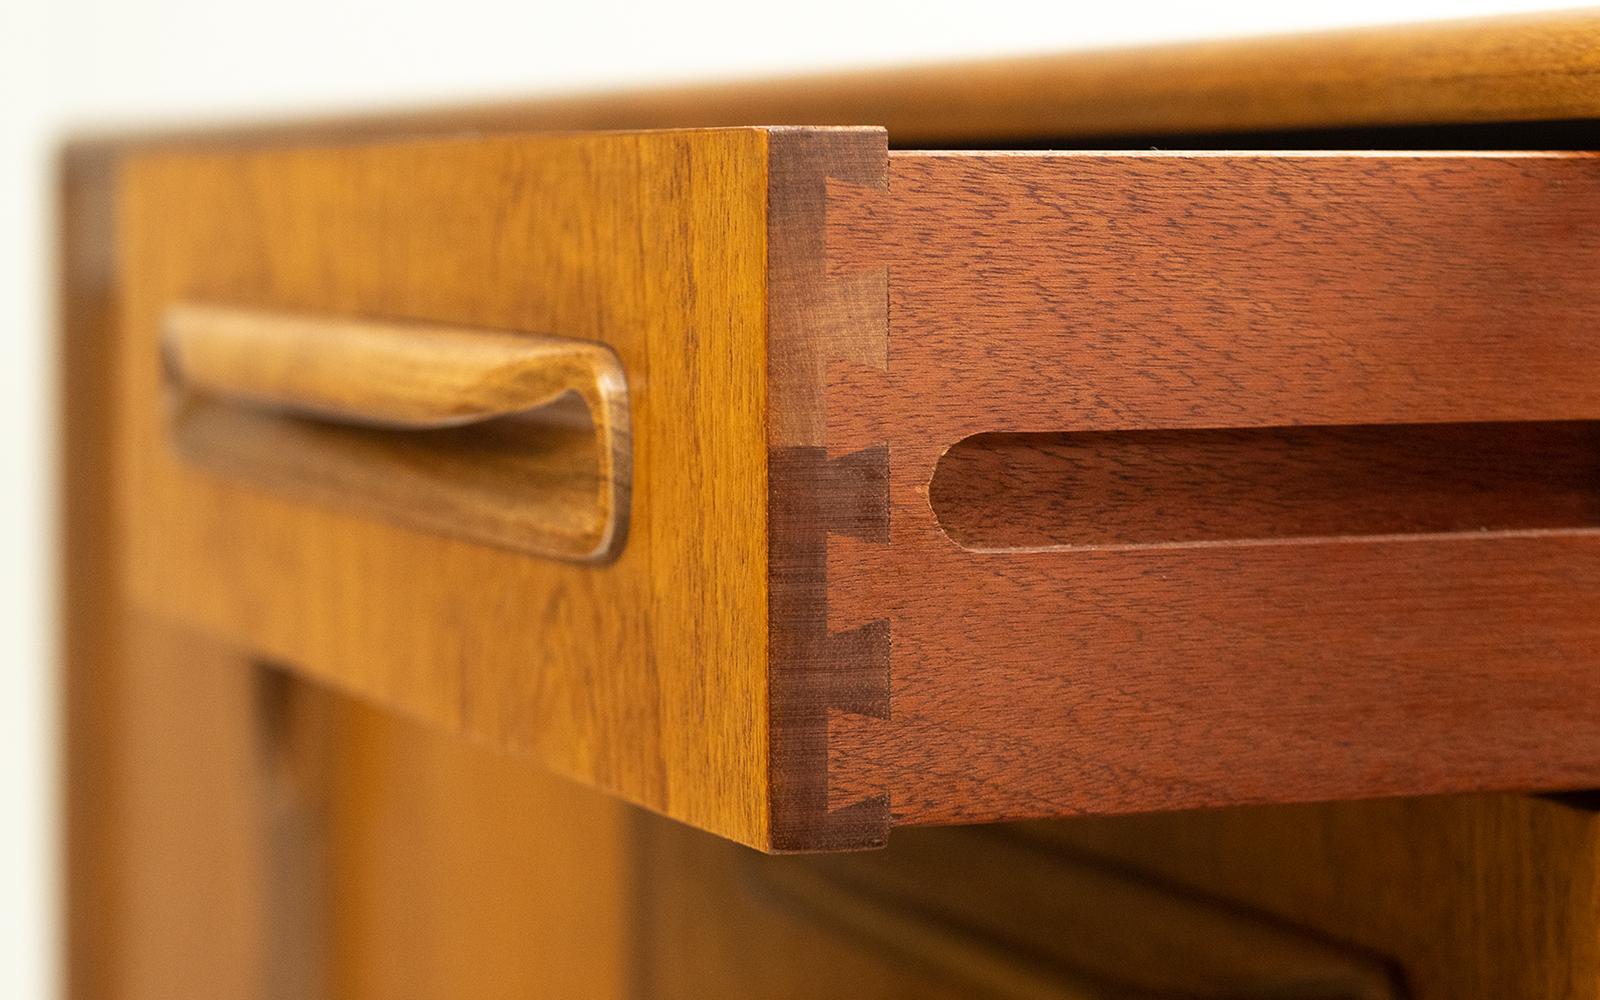 G Plan sideboard

A large mid century teak sideboard manufactured by G-Plan, designed as part of the famous 'Fresco' range.

Featuring contrasting solid teak door & drawer handles, four good sized drawers, two spacious cupboards with adjustable